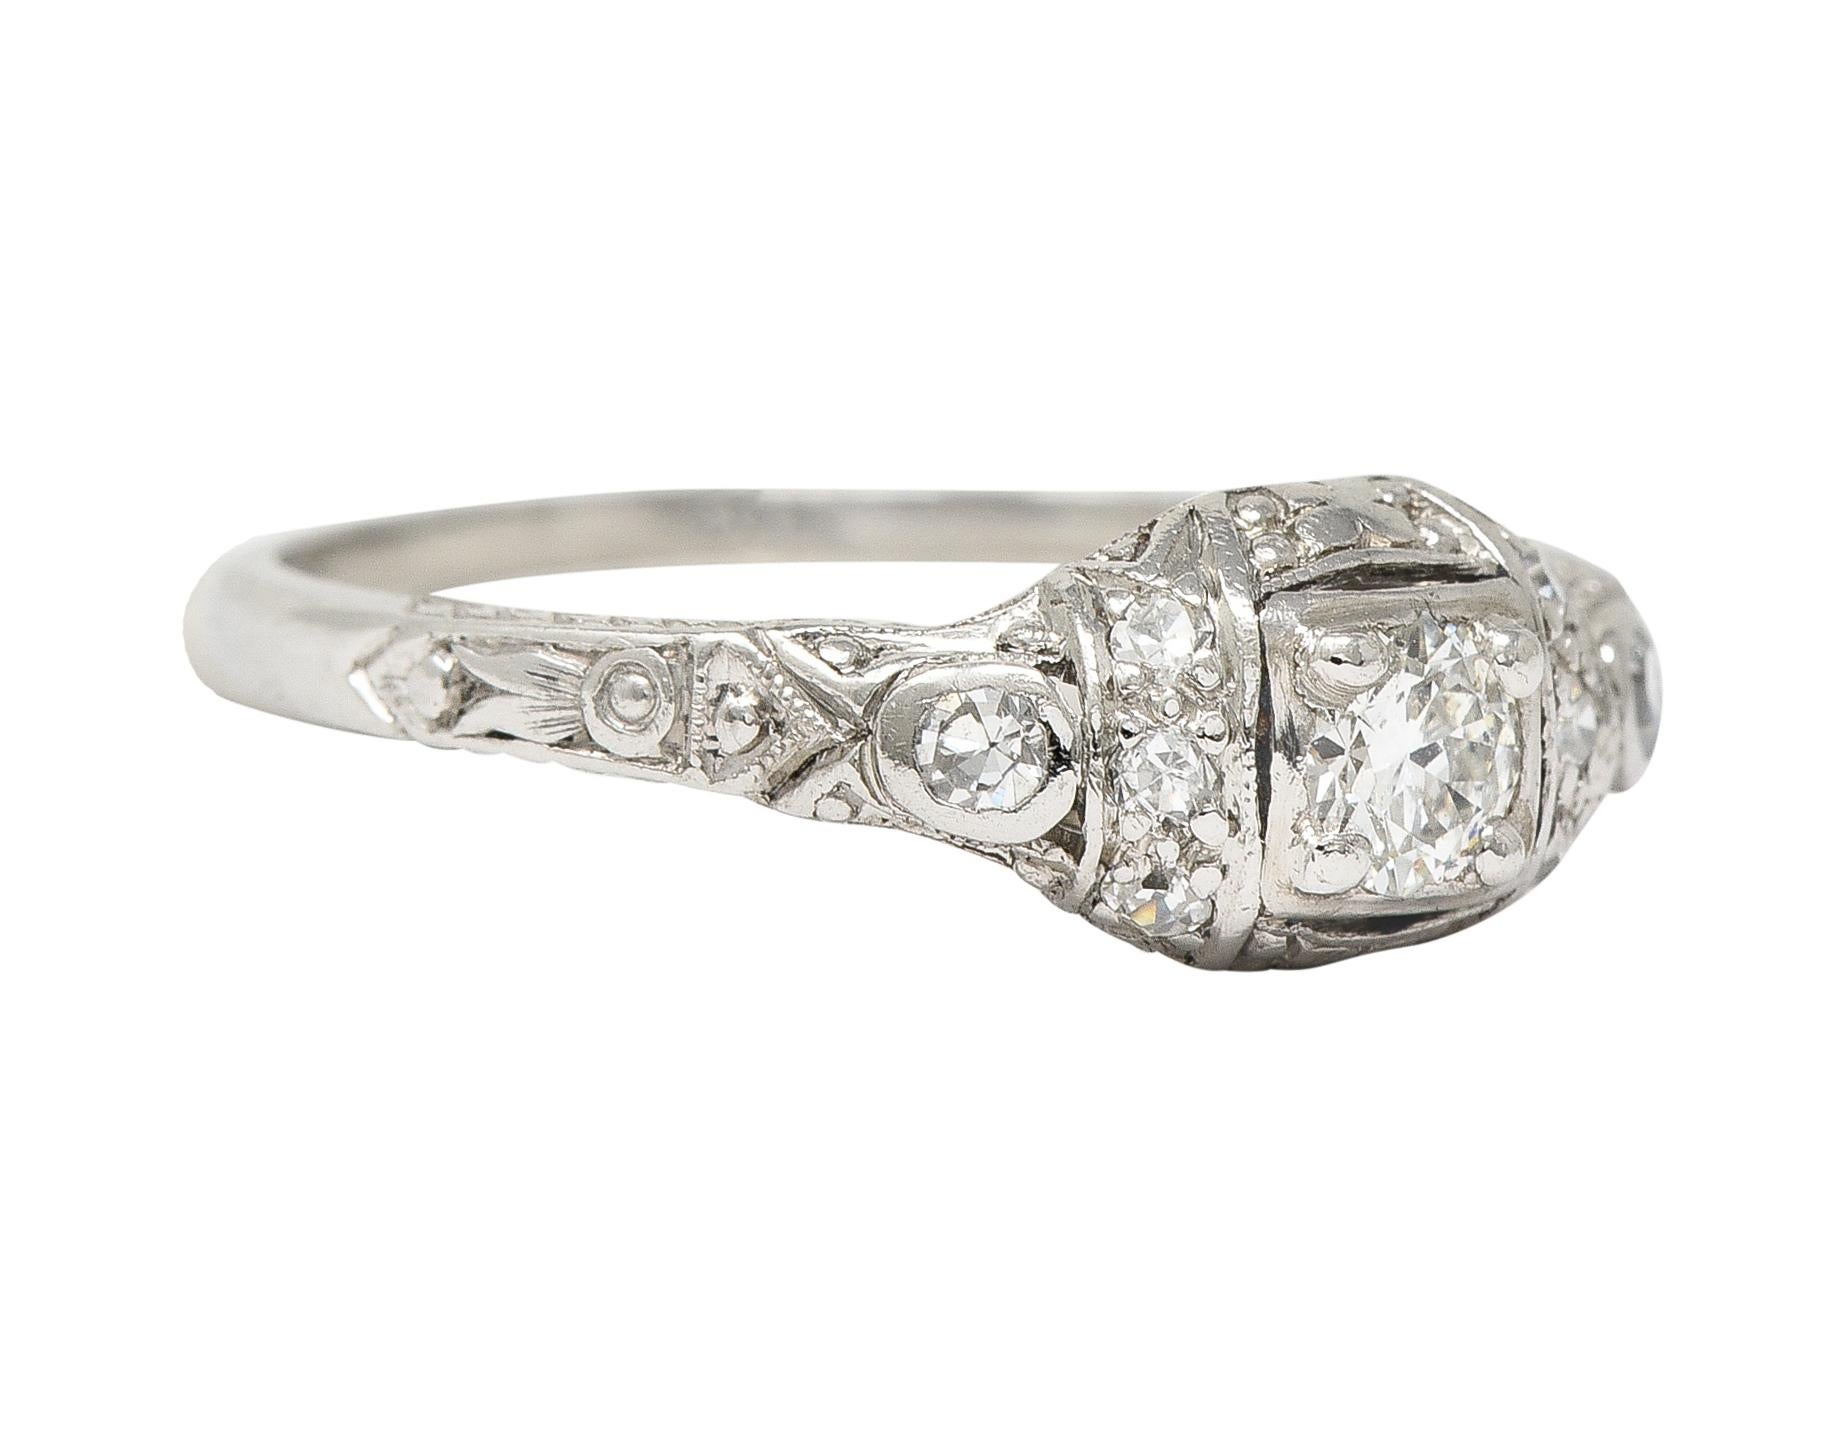 Centering a transitional cut diamond weighing approximately 0.15 carat - I/J color and SI clarity
Bead set in a square form head with a pierced and engraved ornate geometric surround
Flanked by channel and bezel set single cut diamonds weighing